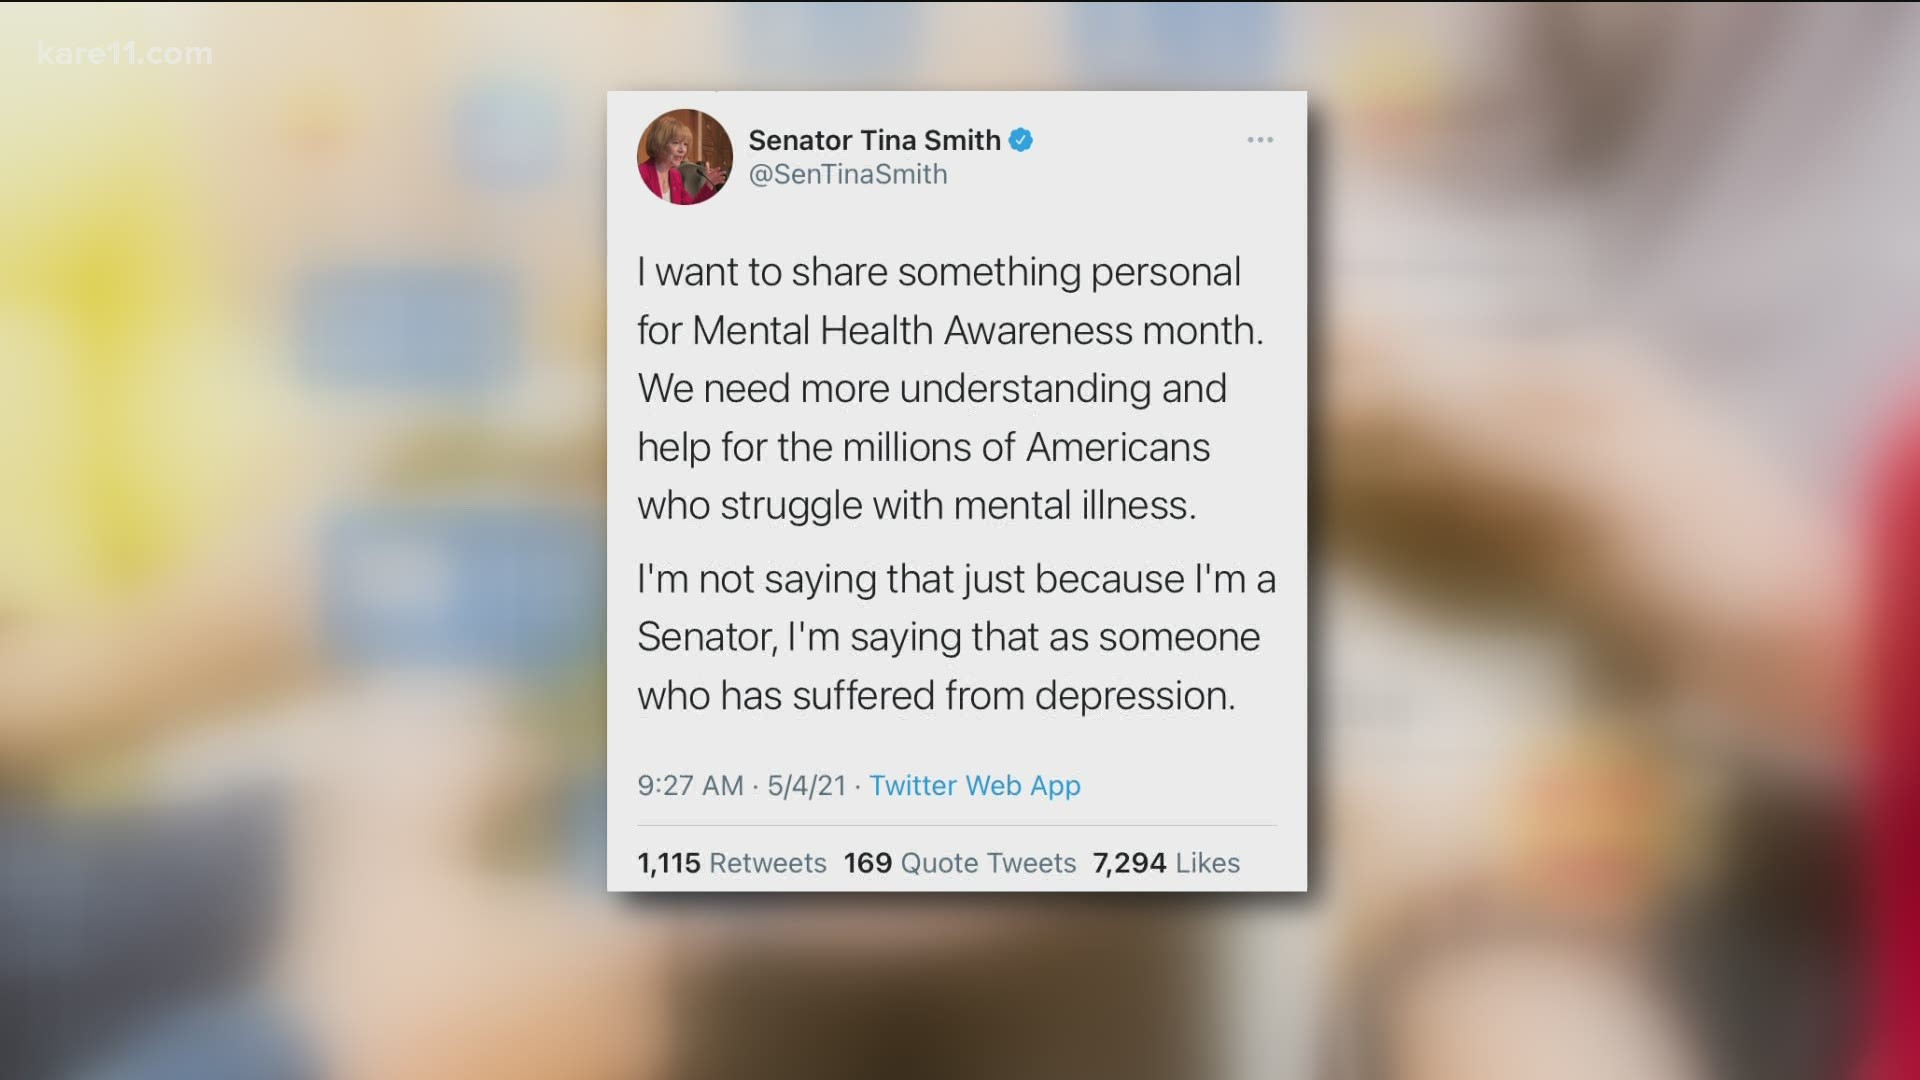 As she rolls out three mental health-related bills, Senator Smith opens up about her struggles with depression.